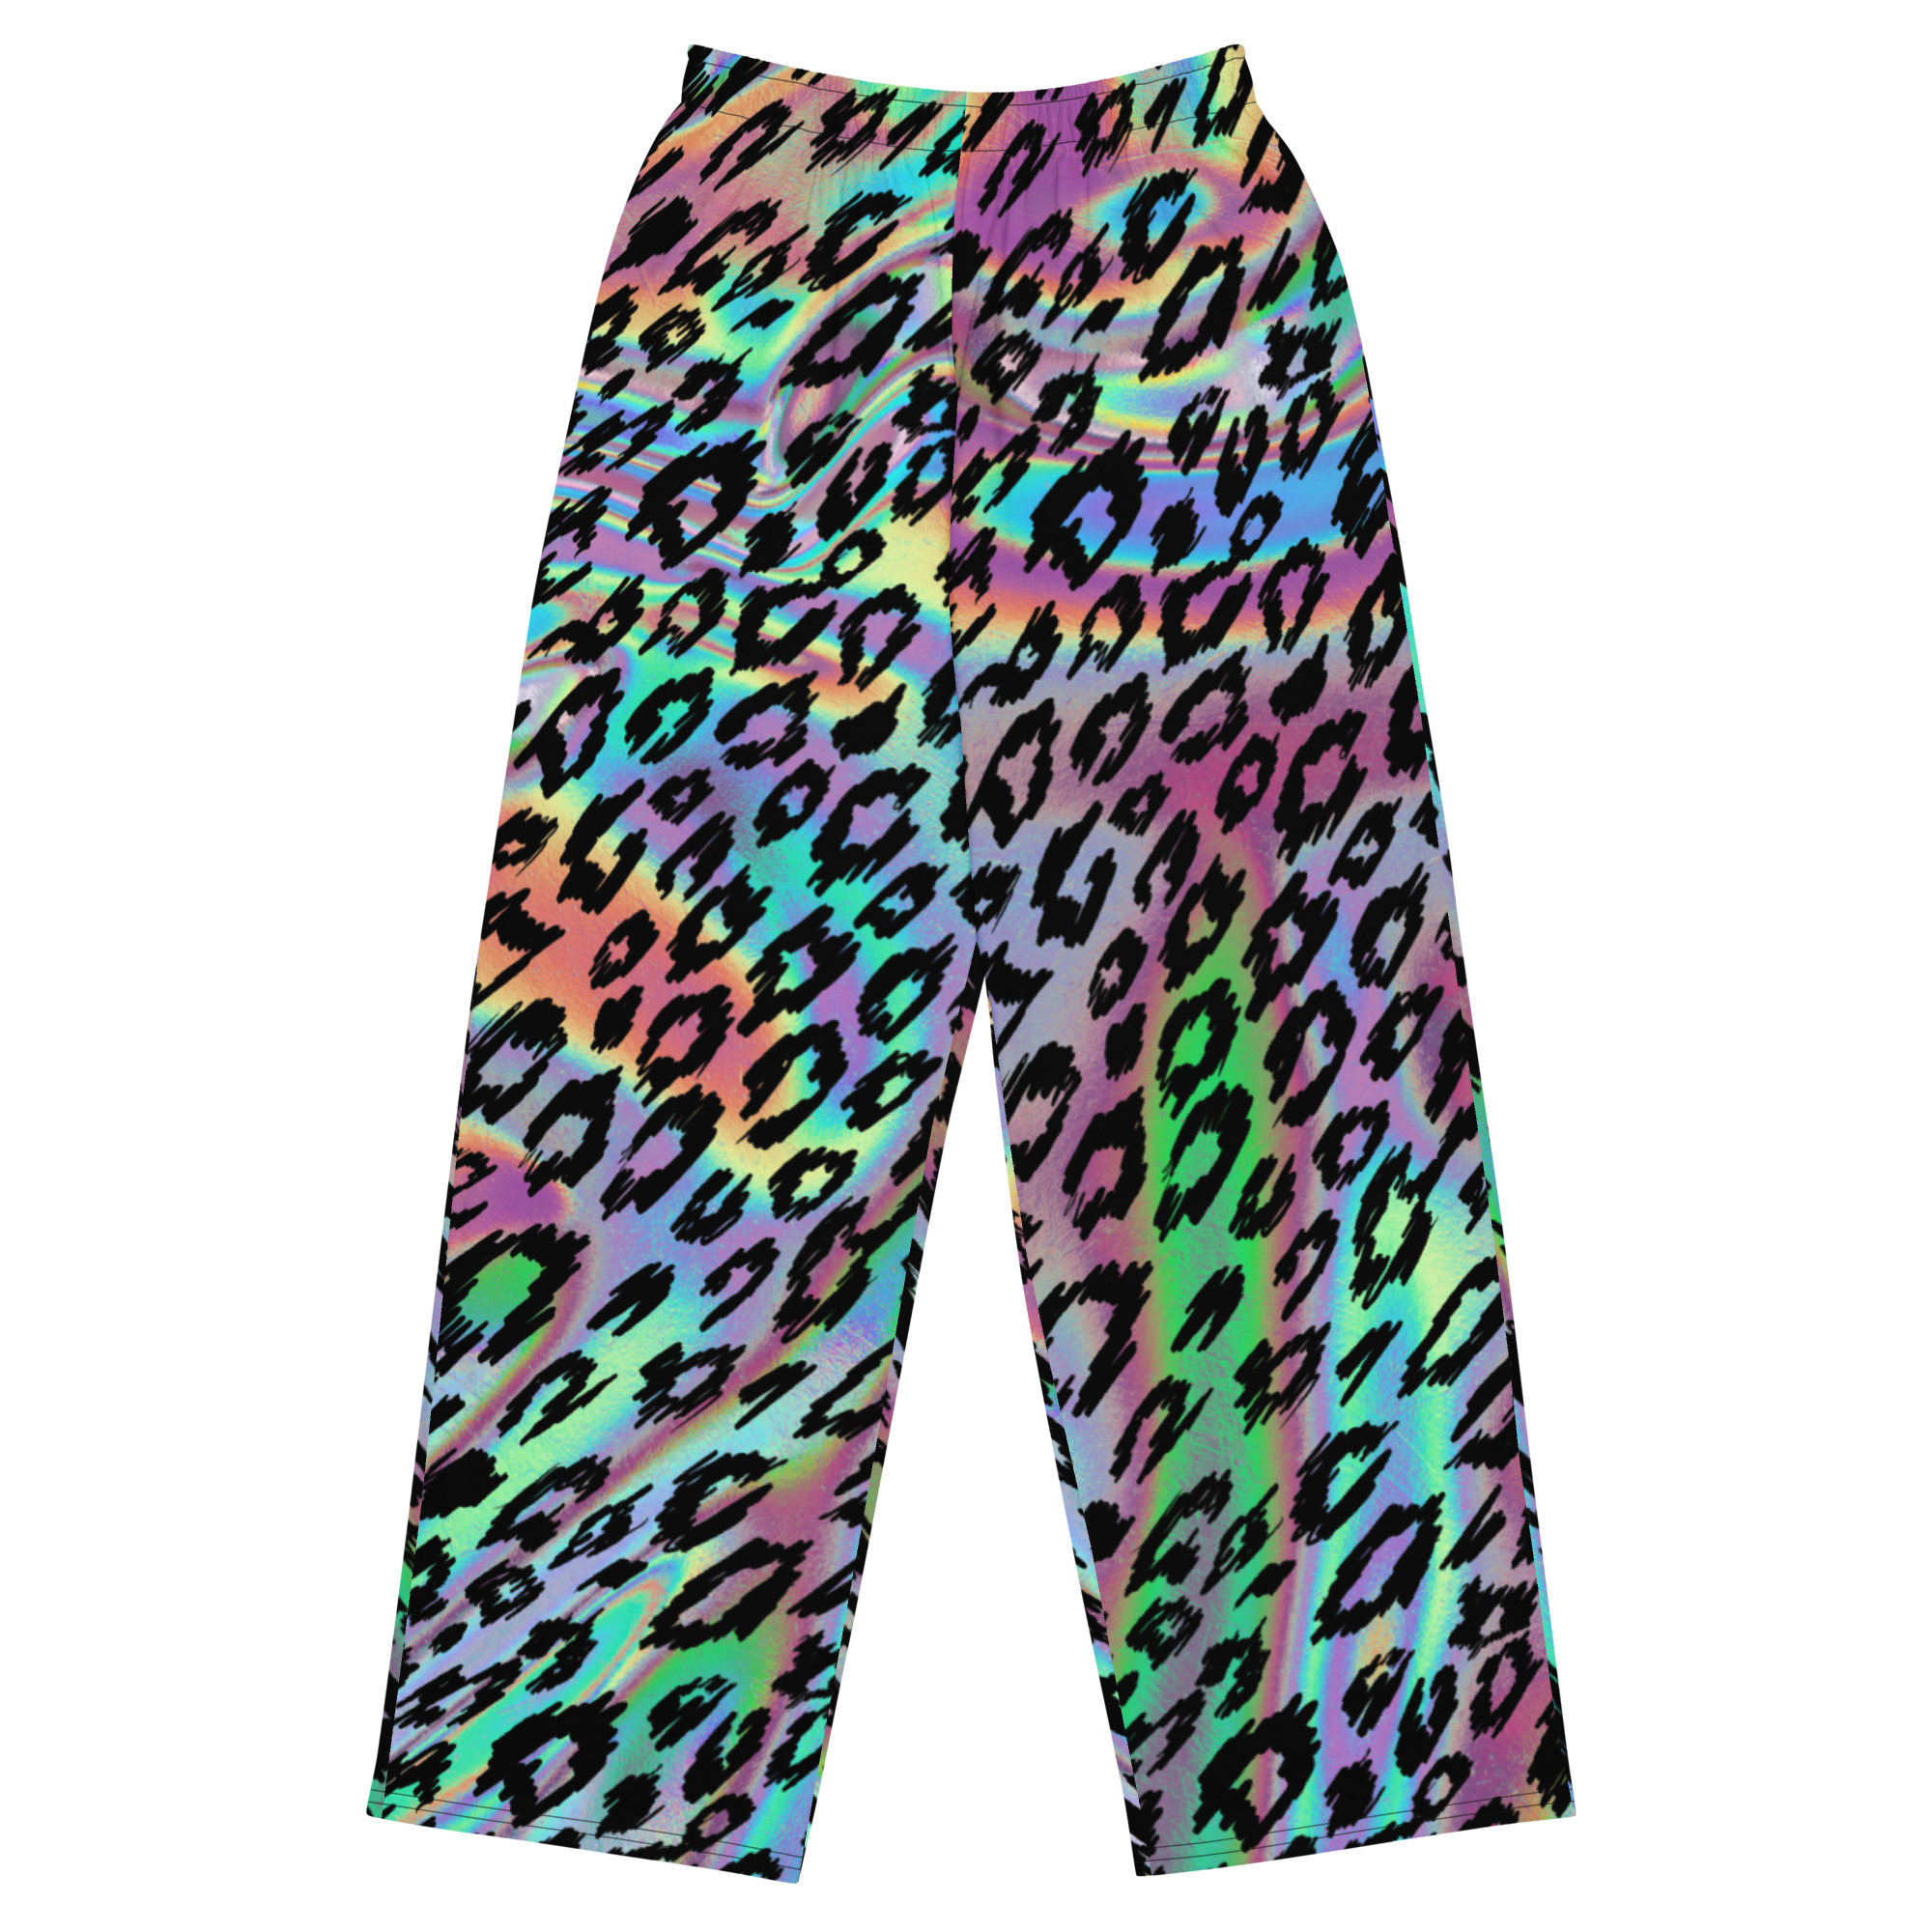 Featured image for “Psychedelic Leopard -  All-over print unisex wide-leg pants”